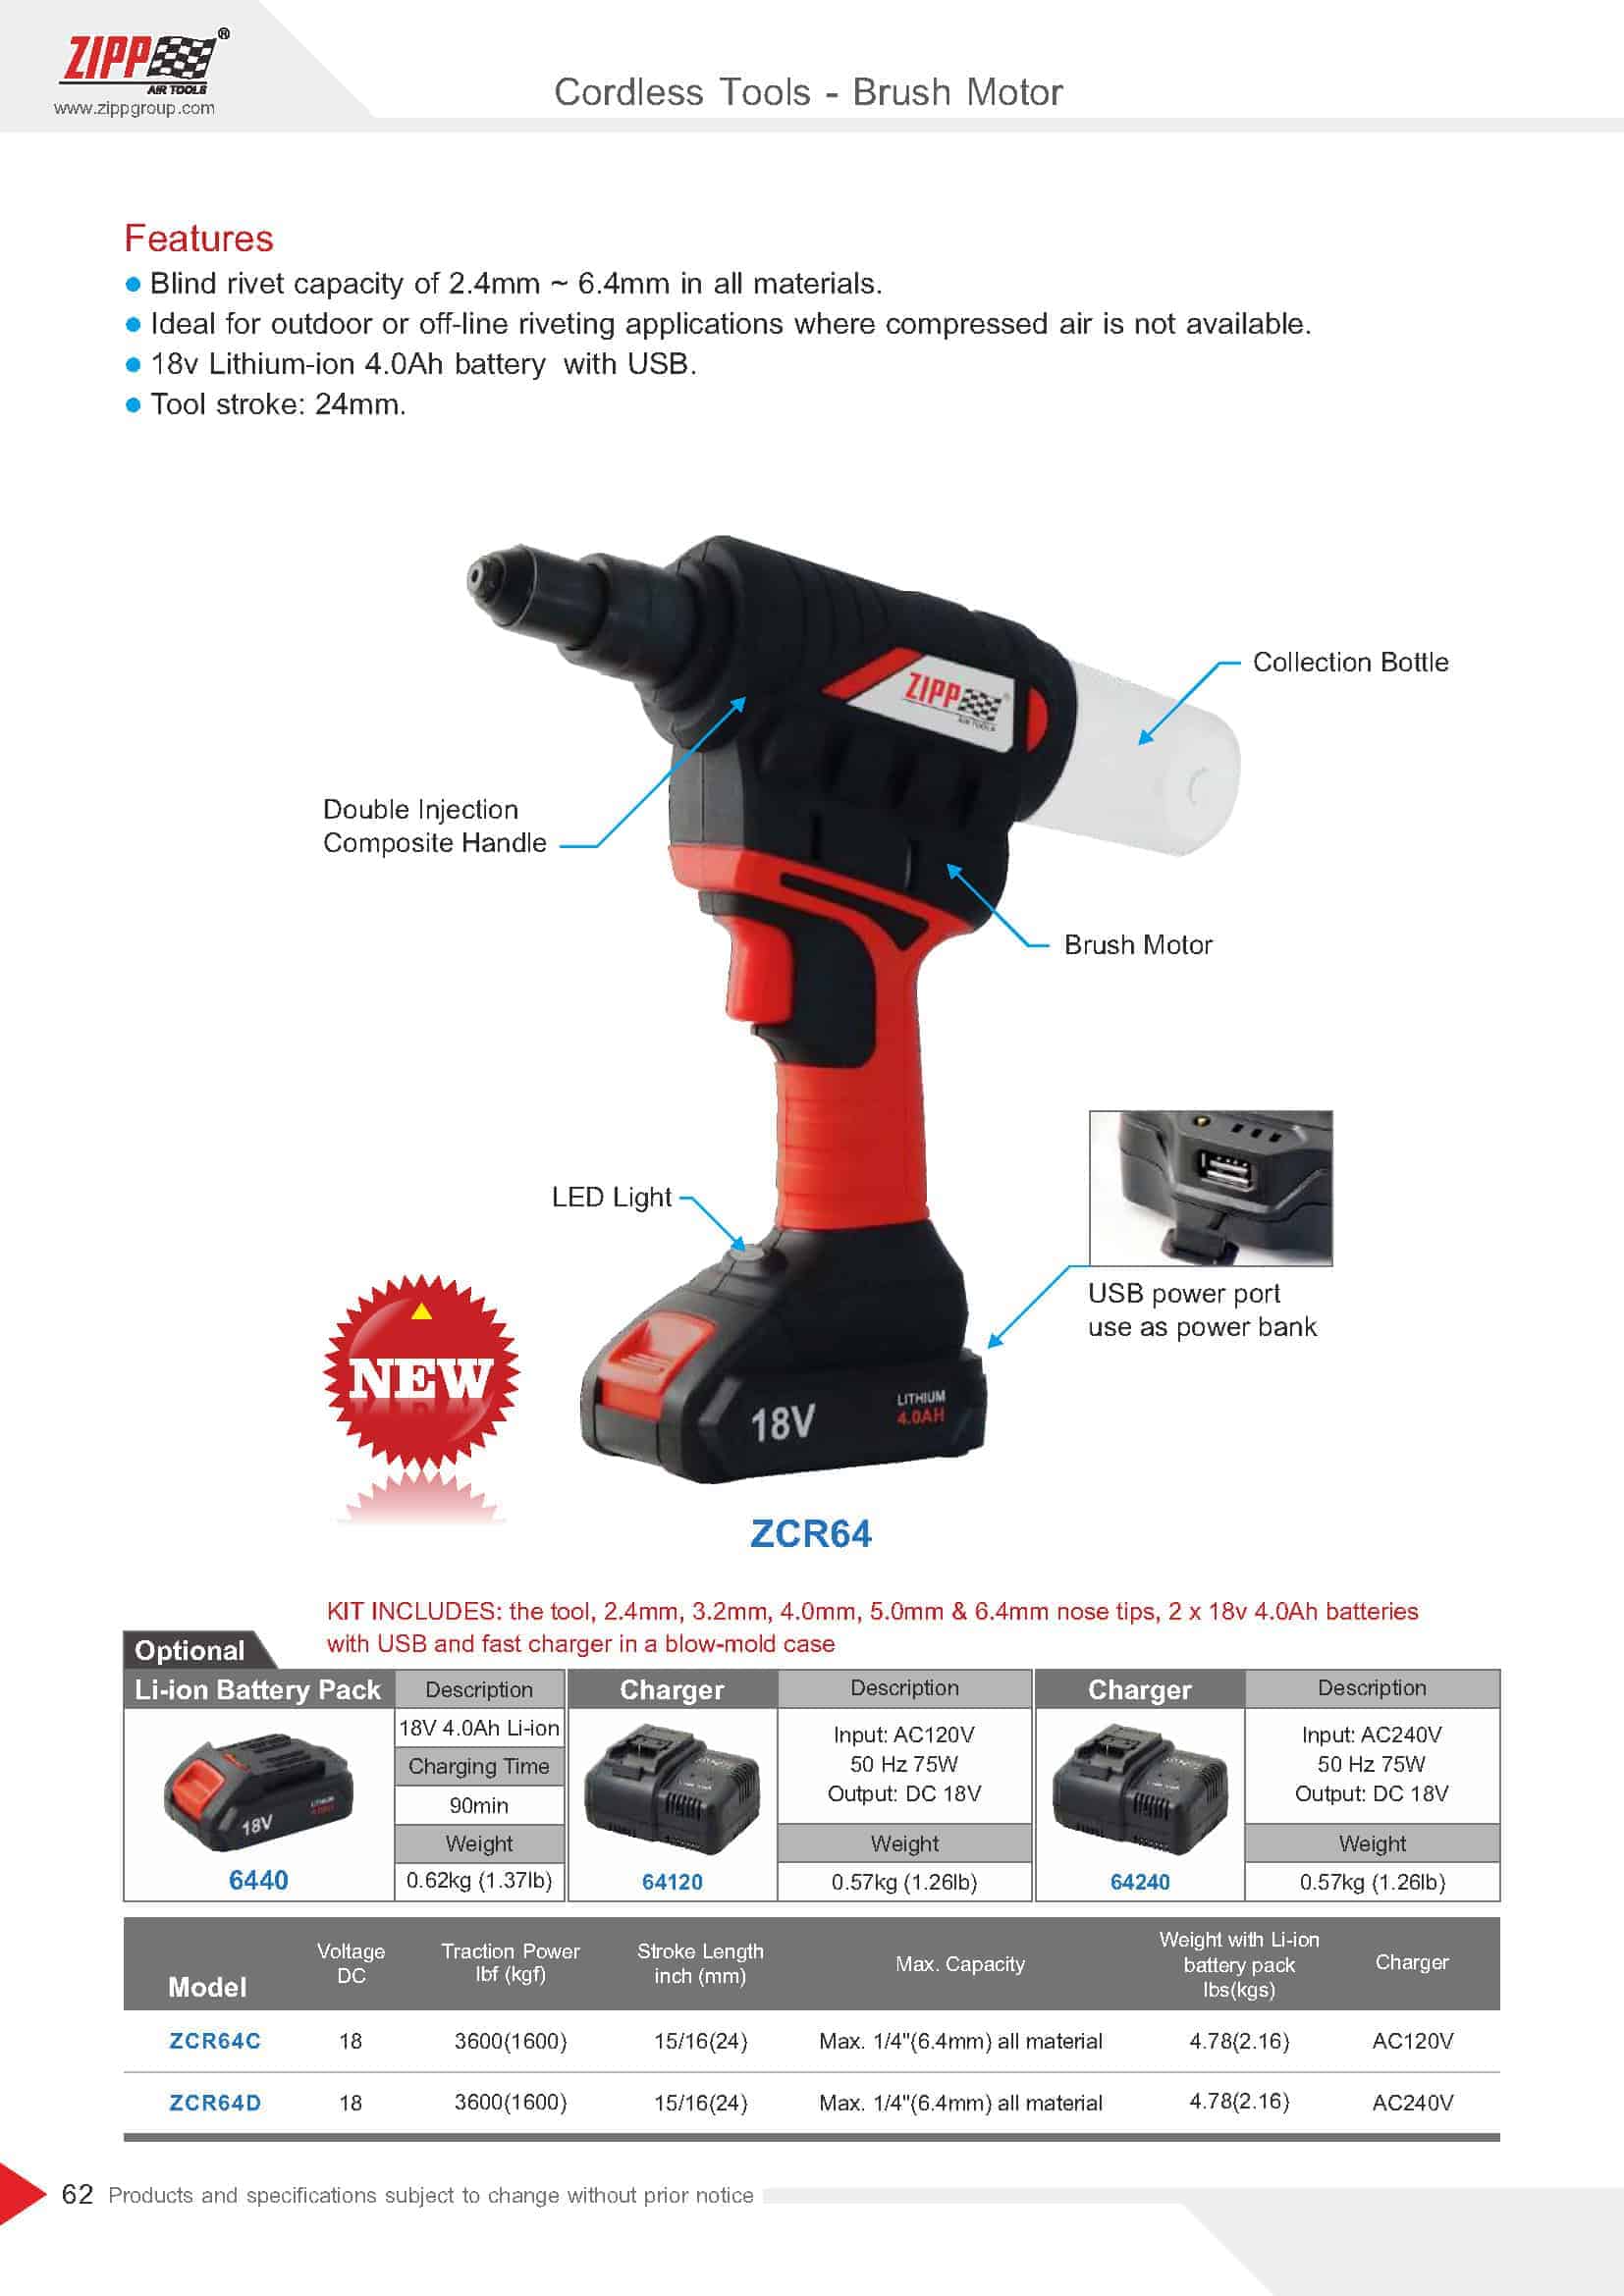 brand new cordless blind riveter available now